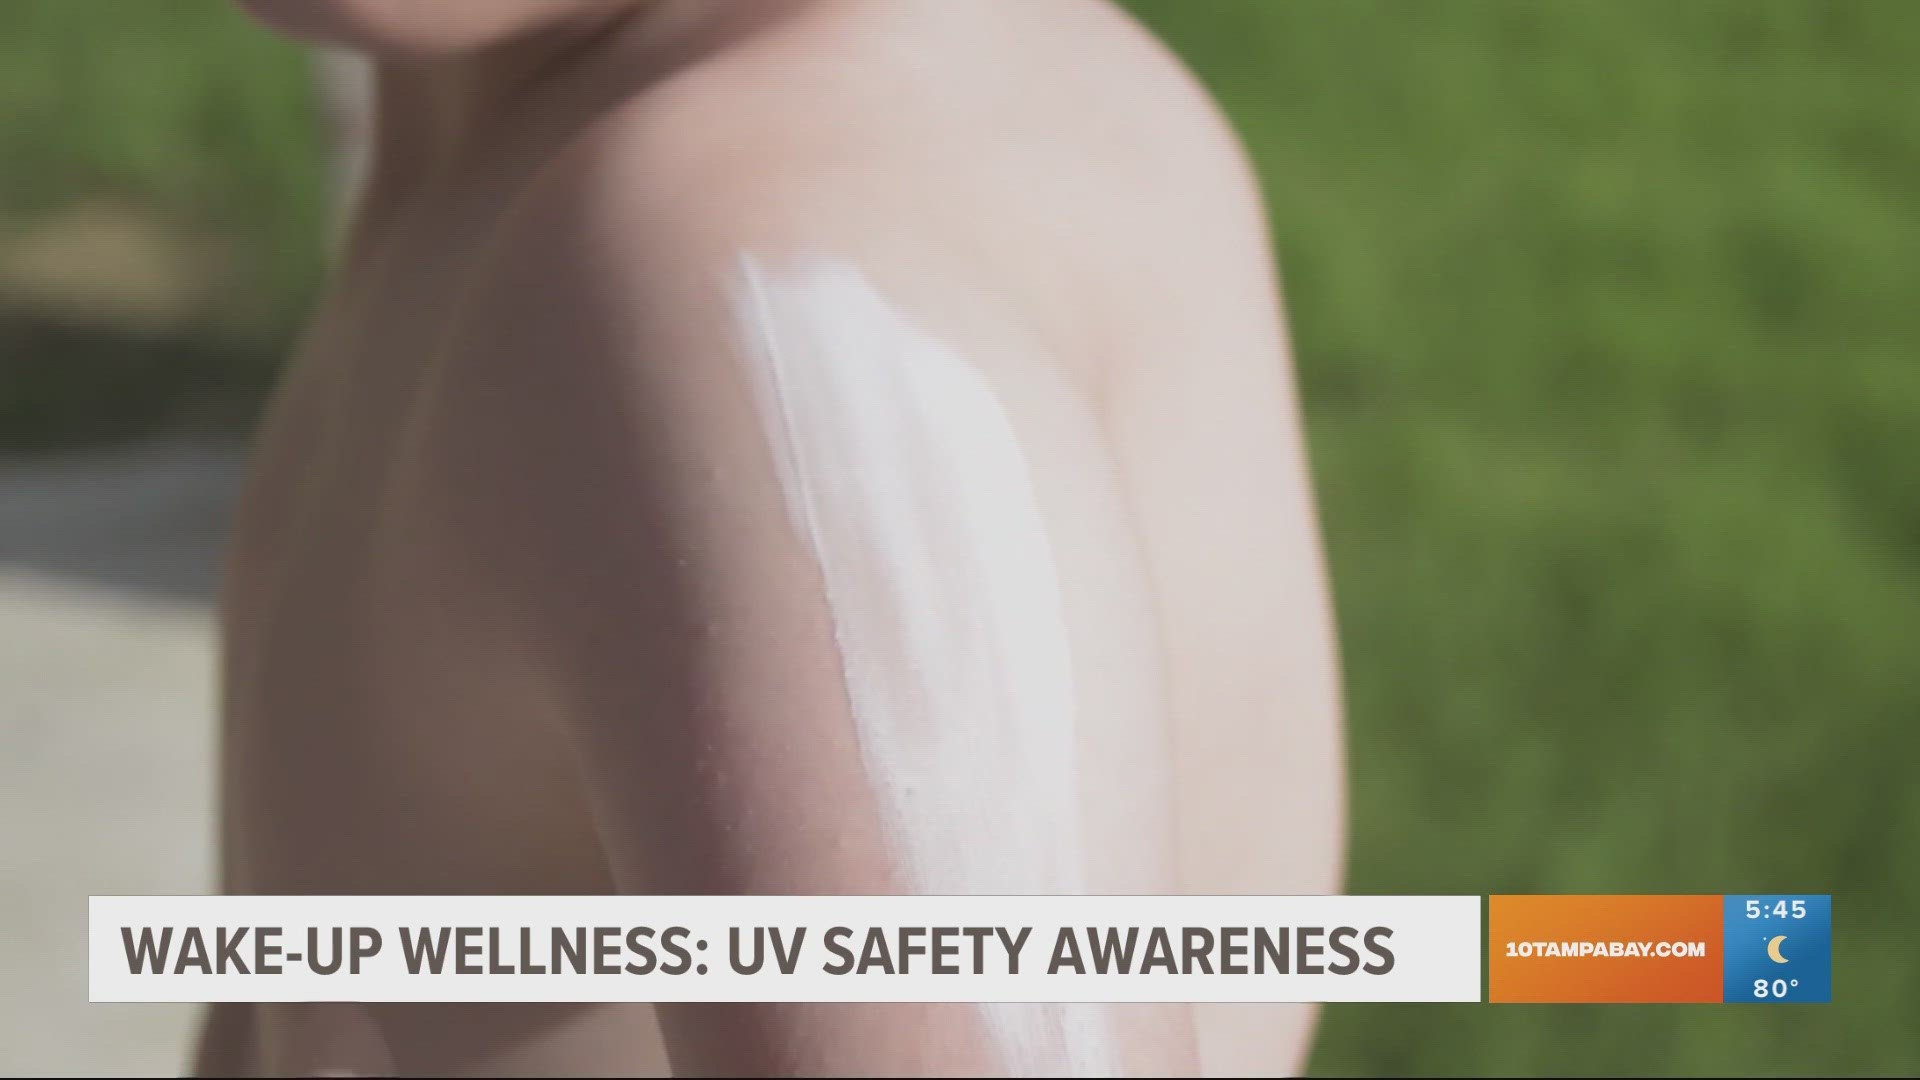 When it comes to protection from skin cancer, sunscreen is key in blocking harmful UV rays. Here's how to make the most out of your sunscreen.